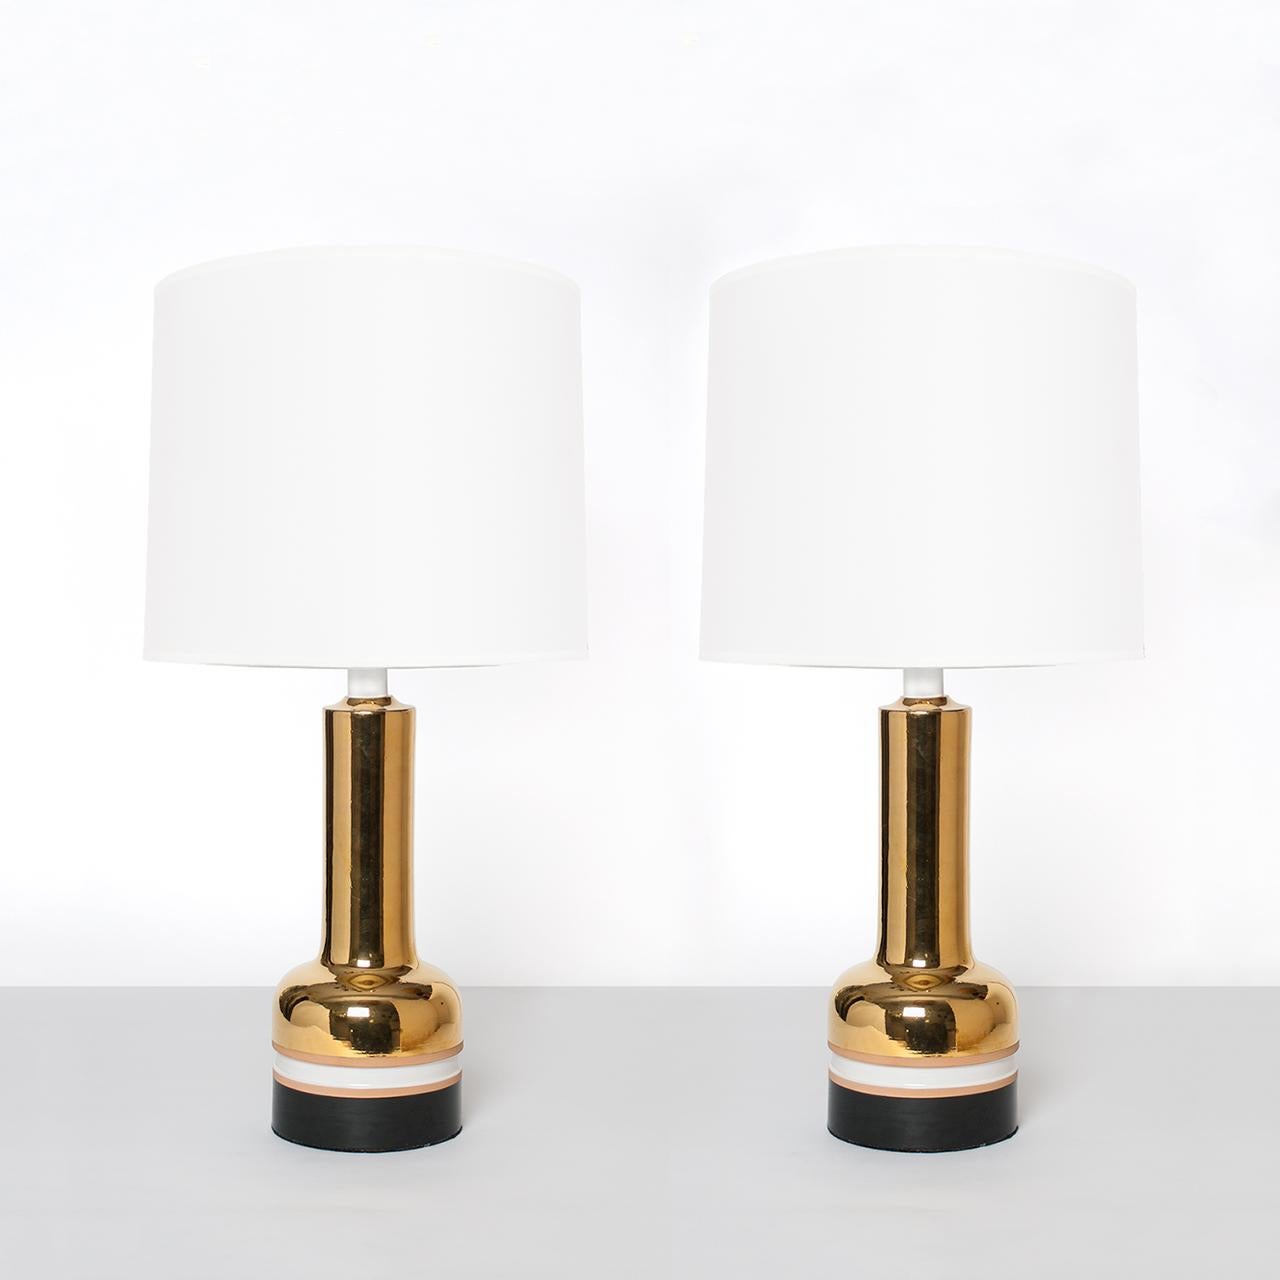 Pair of Scandinavian Modern ceramic table lamps with brilliant gold glaze made in Italy for Bergboms of Sweden. The lamps are detailed with unglazed and glazed bands in black and white. Newly re-wired for the USA with polished brass double socket